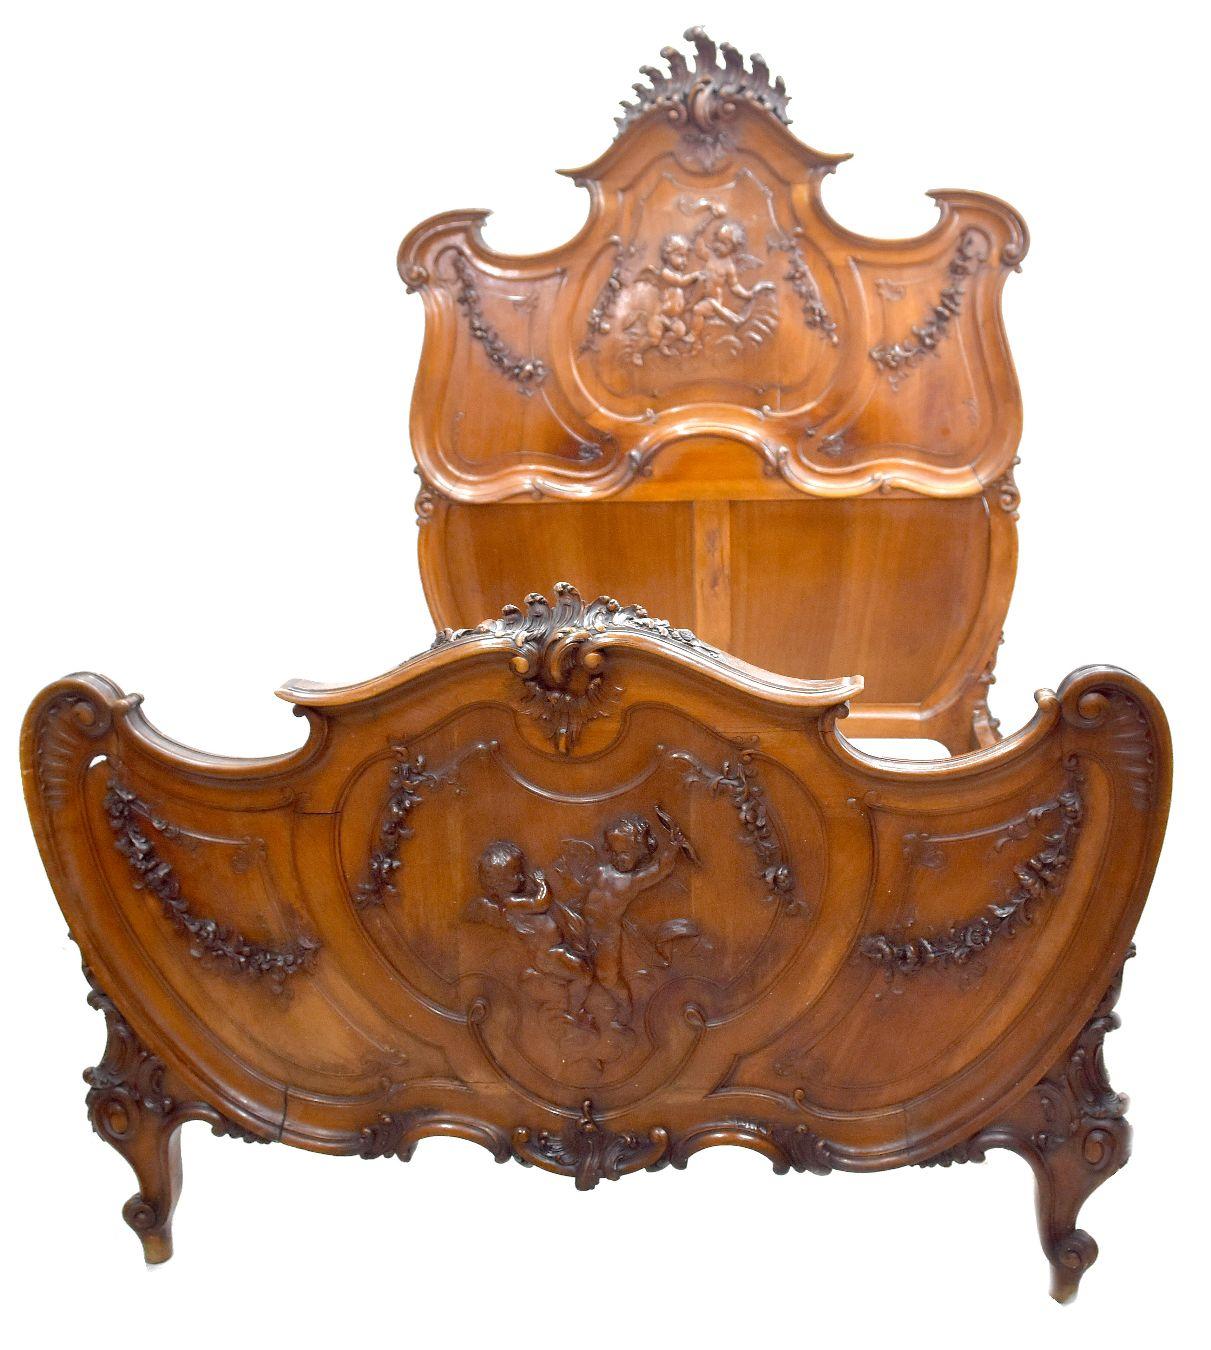 19th Century Exceptional baroque Louis XV style bed in walnut carved for babies Louis XV style bed in Provençal walnut richly carved and engraved XIXth century decorated with acanthus leaves and snail feet. Interior bed frame 194 cm by 130 cm. Part